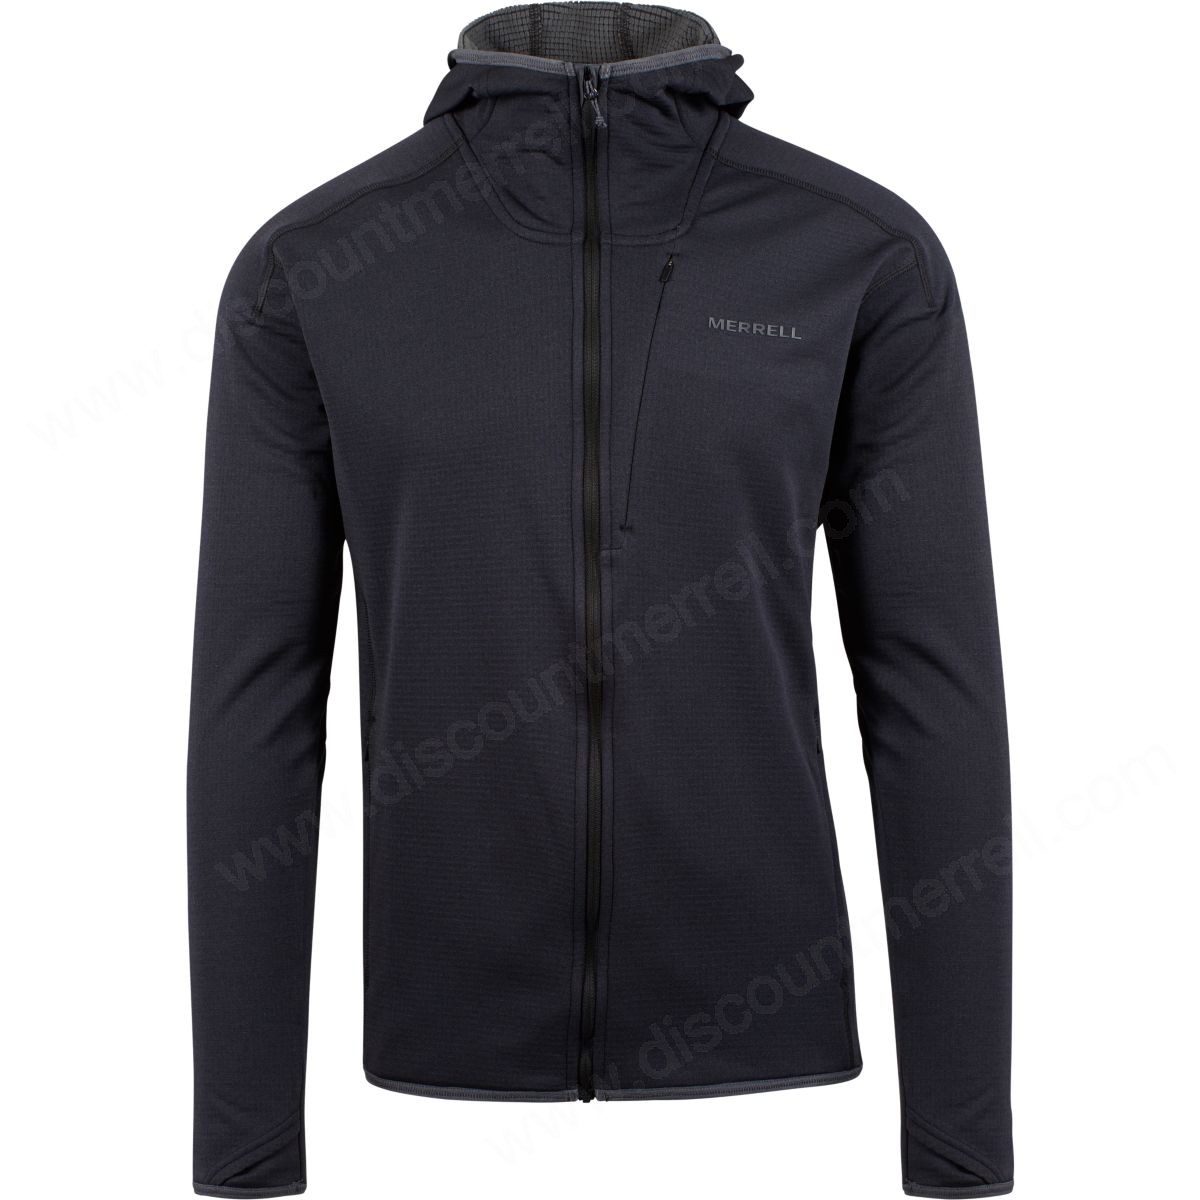 Merrell Mens's Midweight Long Sleeve Full Zip Mid-Layer With Drirelease® Fabric Black Heather - Merrell Mens's Midweight Long Sleeve Full Zip Mid-Layer With Drirelease® Fabric Black Heather